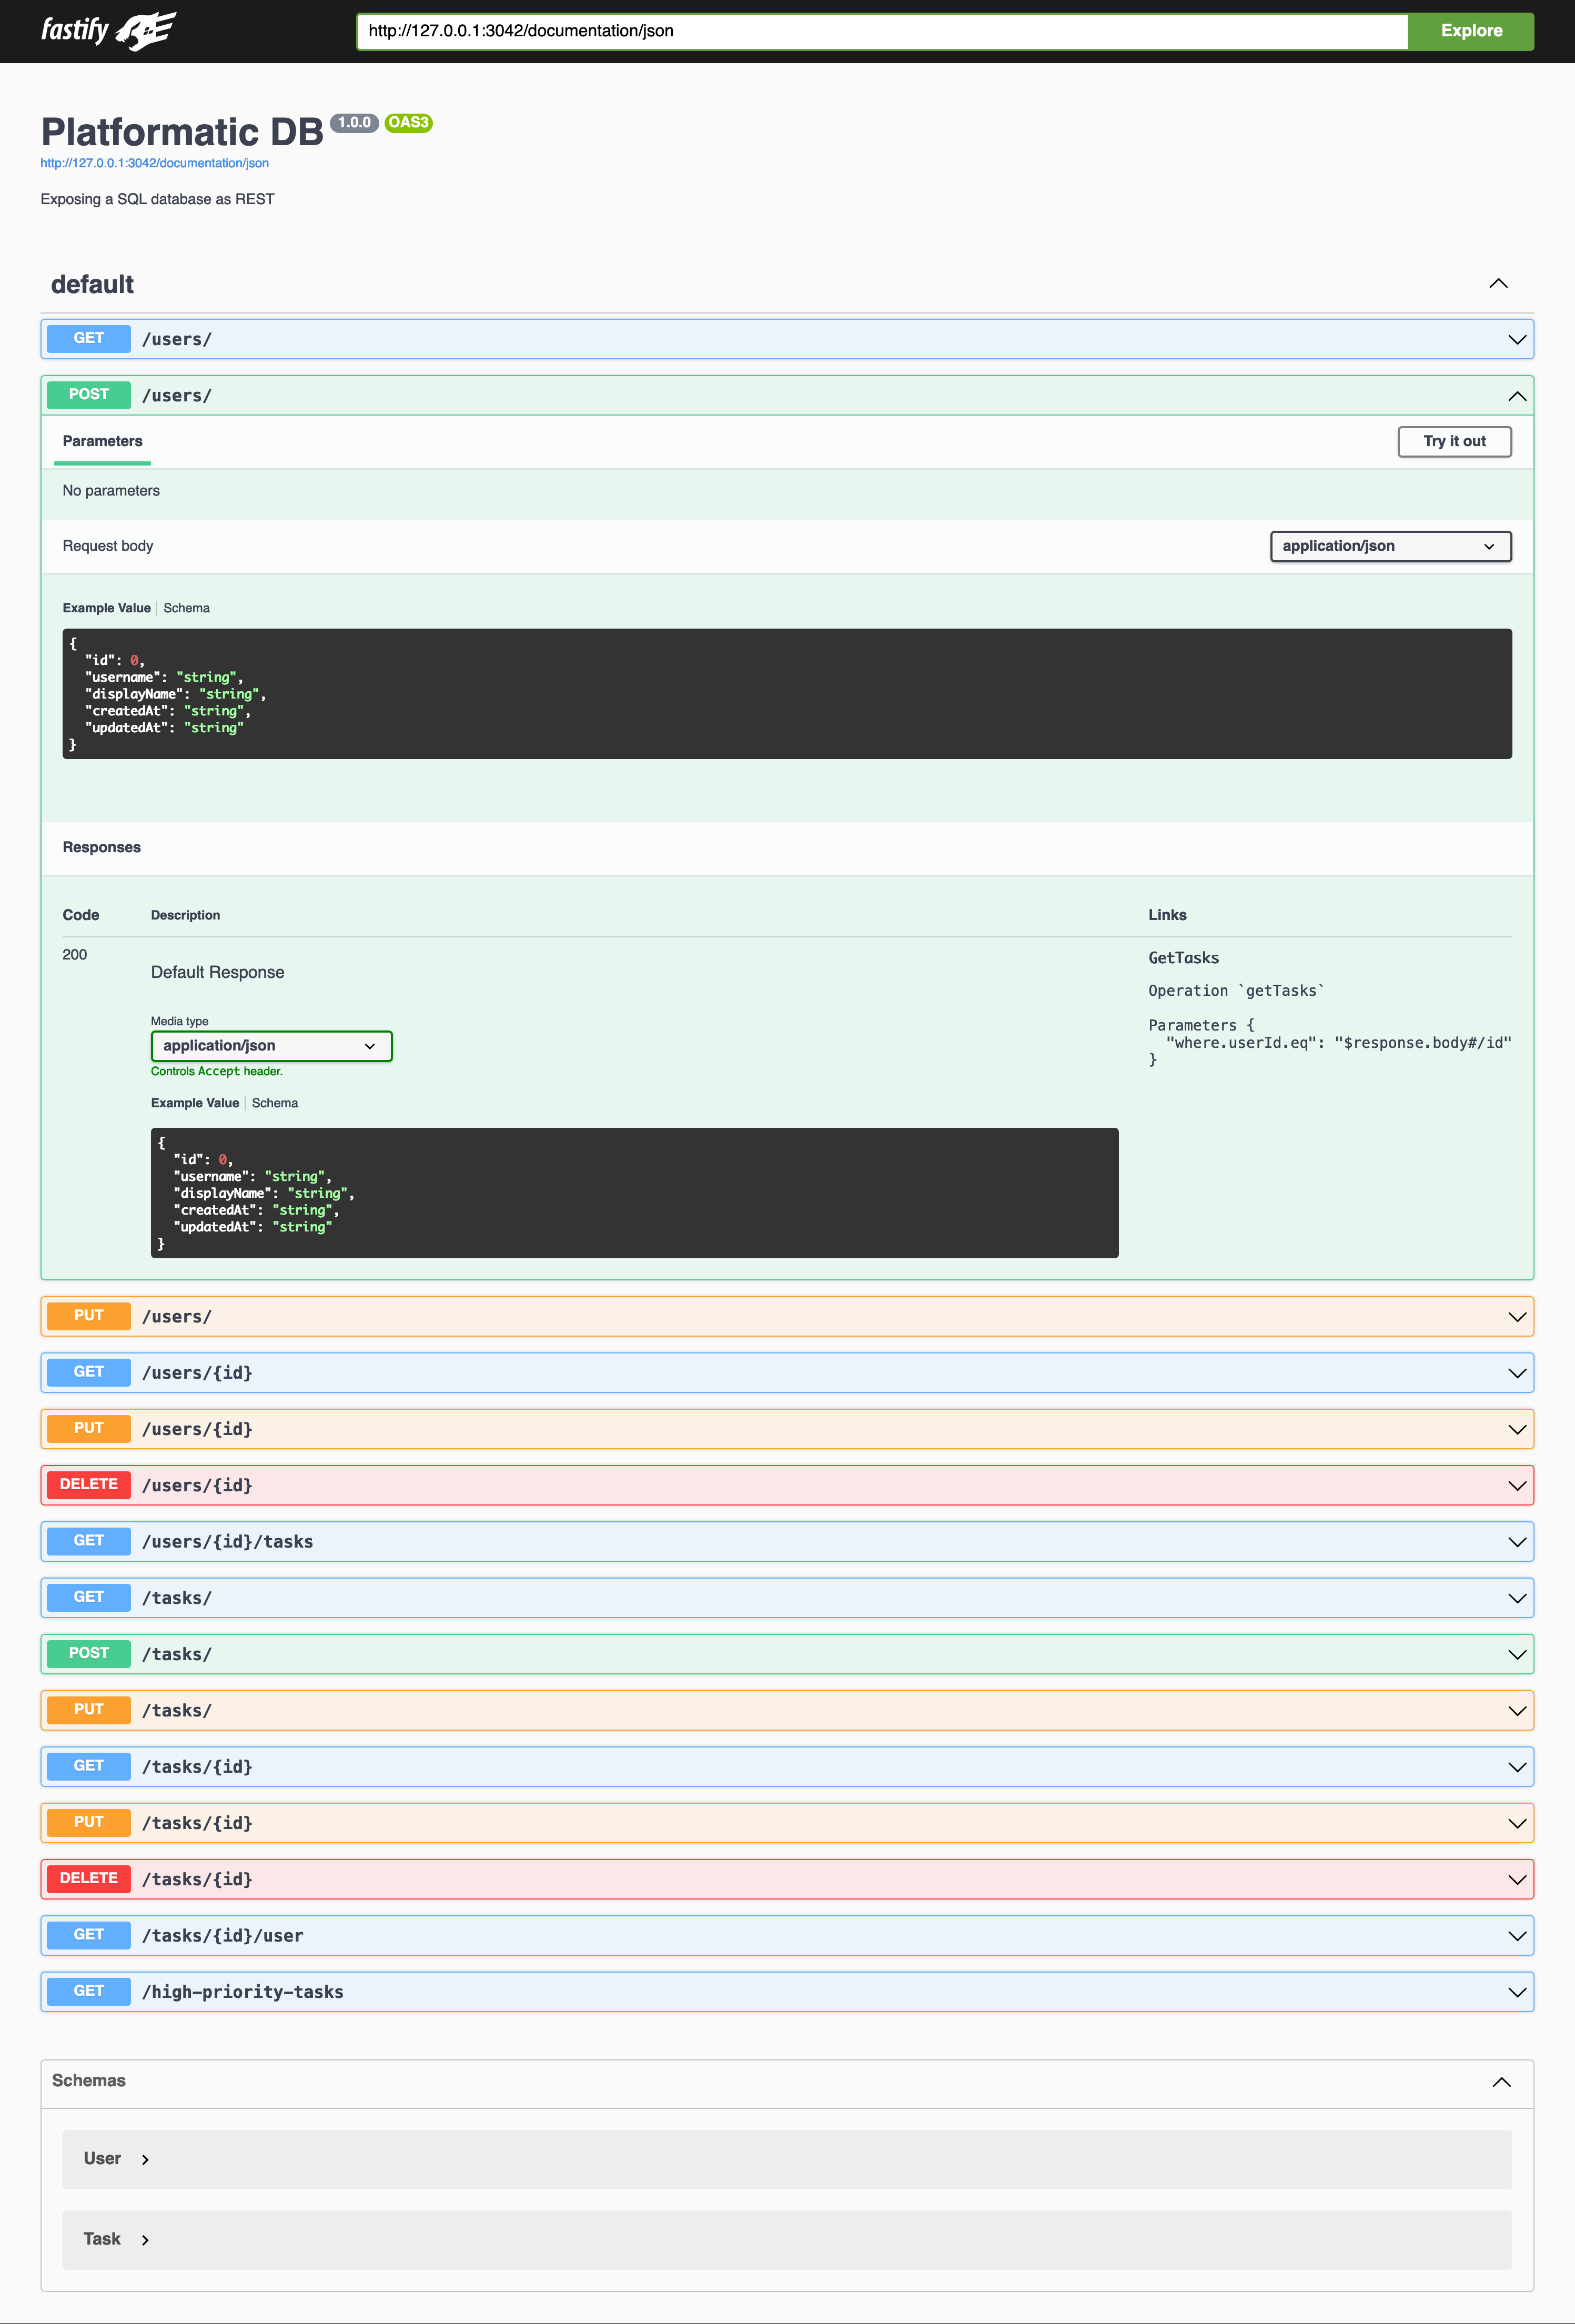 Screenshot of the interactive Swagger UI in a web browser, showing all the REST API endpoints